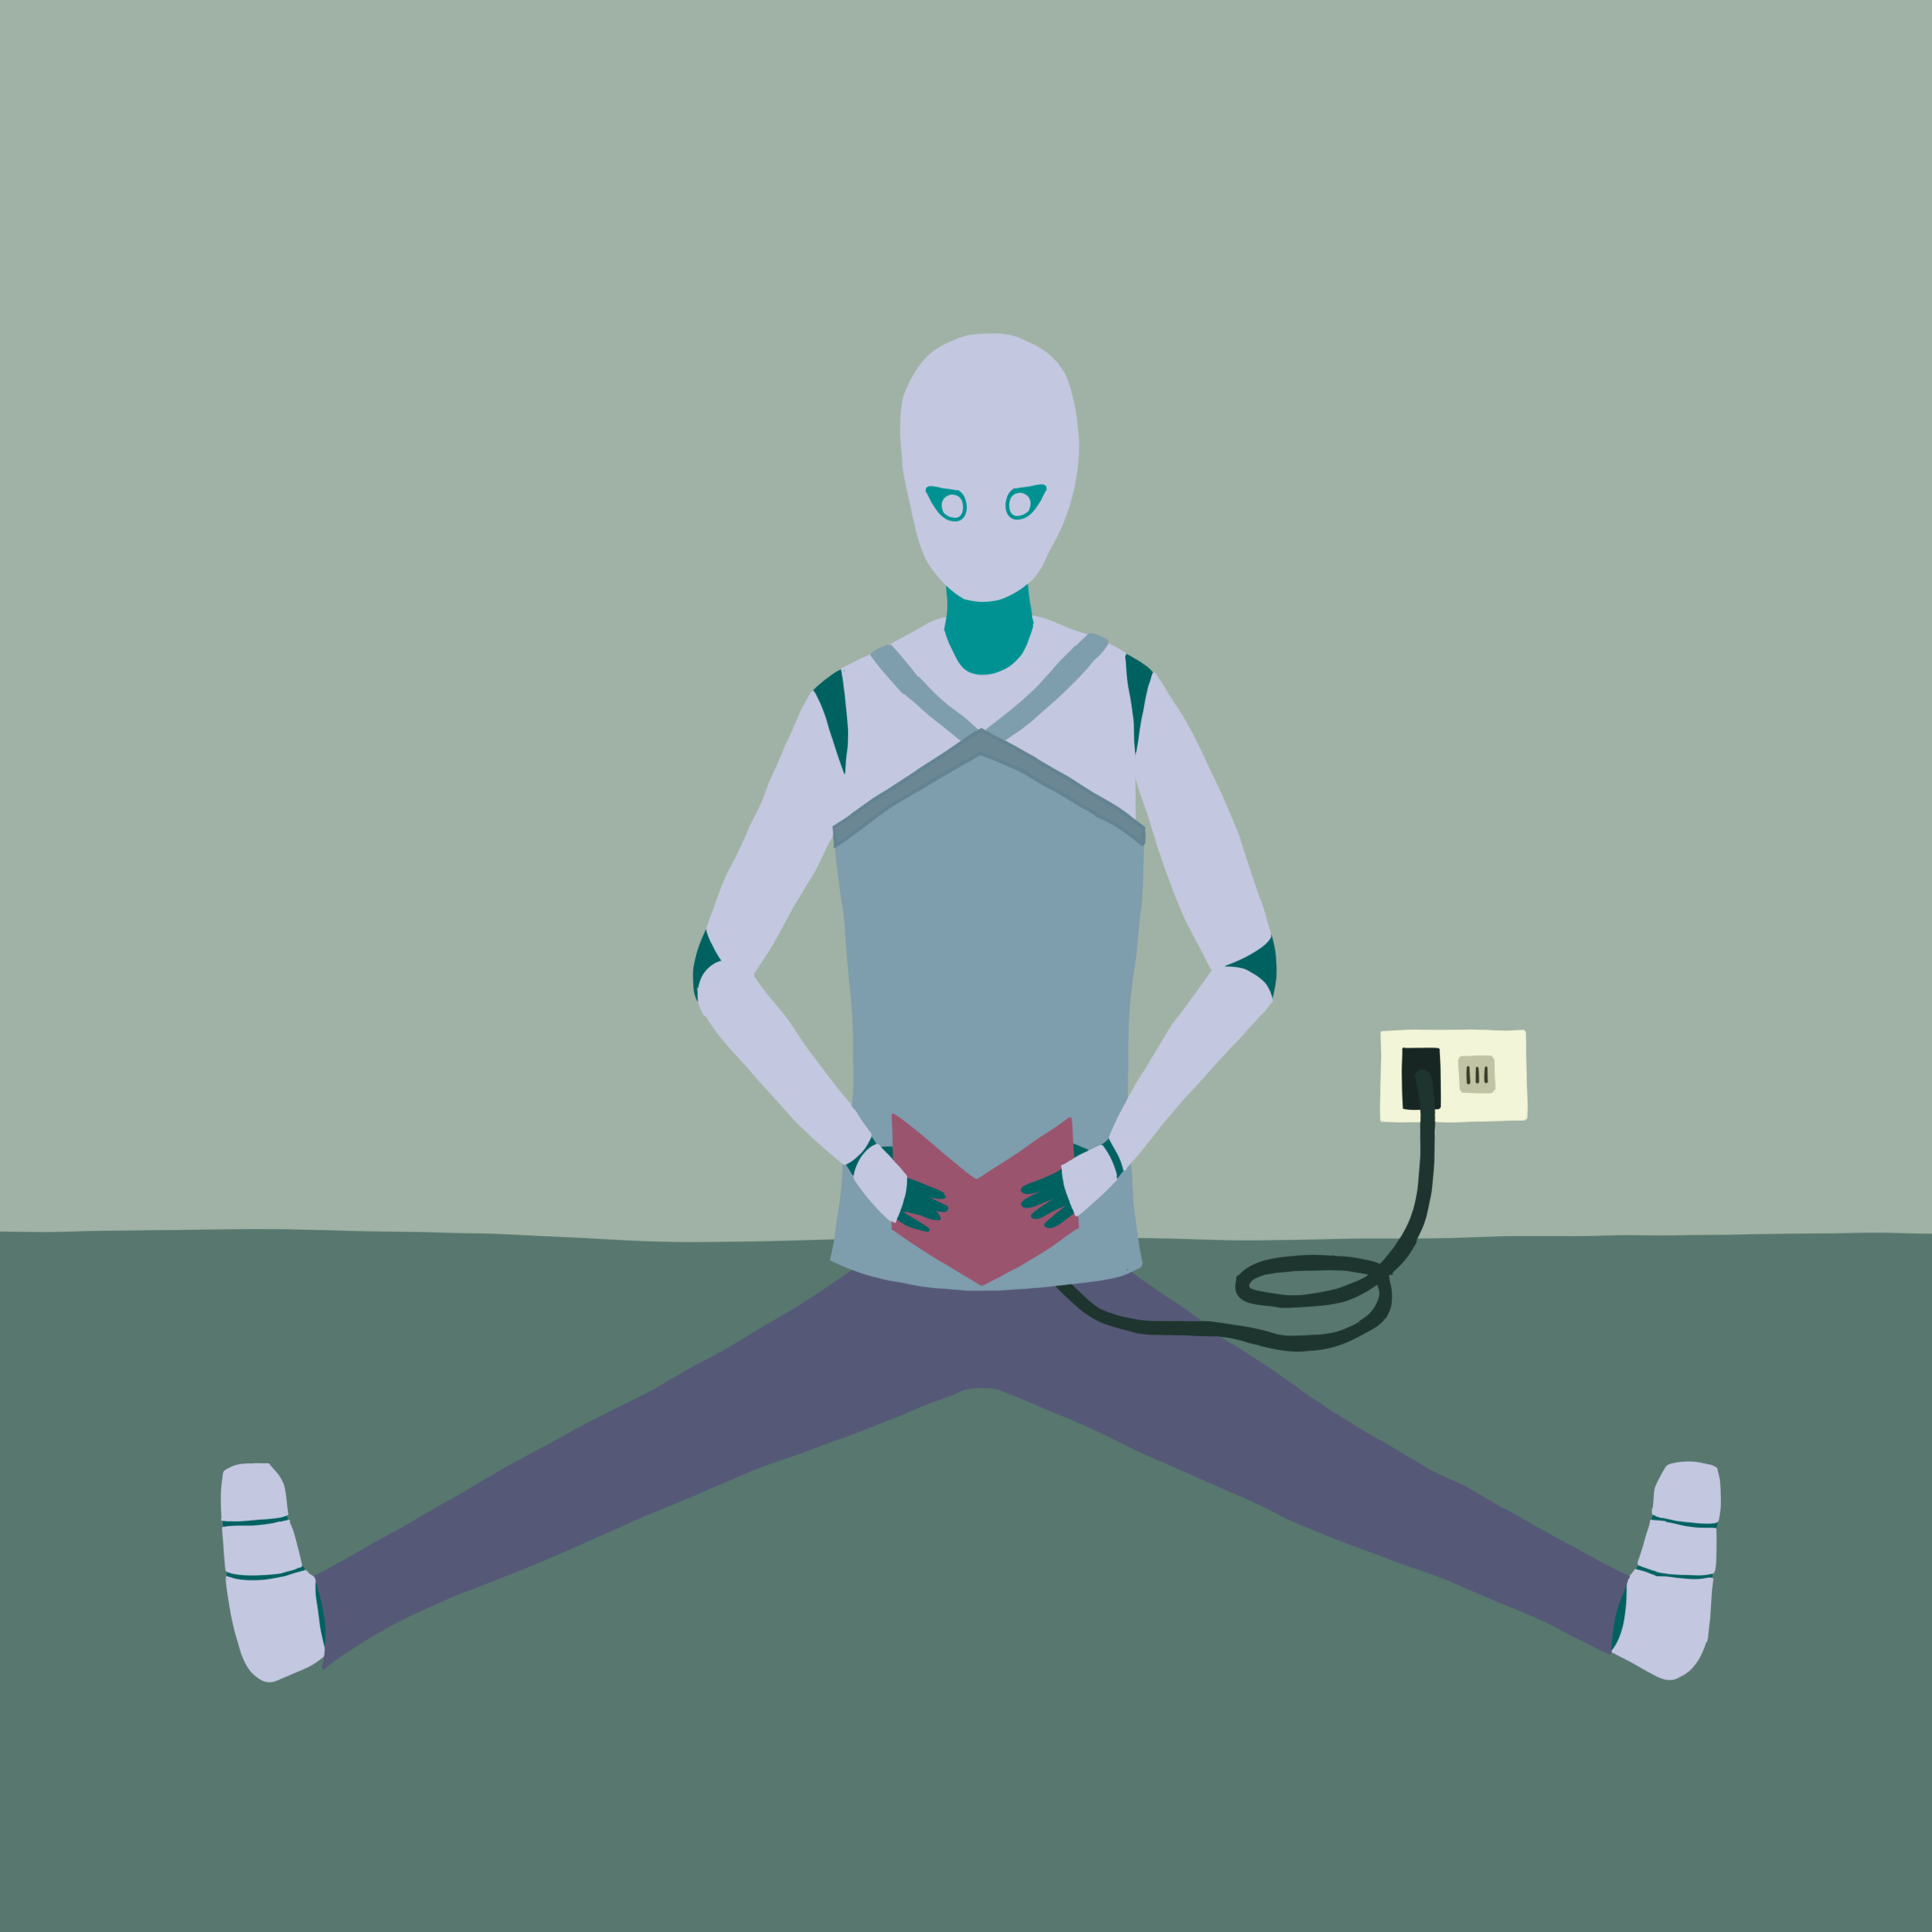 A robot named Rova sitting on the floor reading a book while being plugged into the wall so they can recharge their batteries.